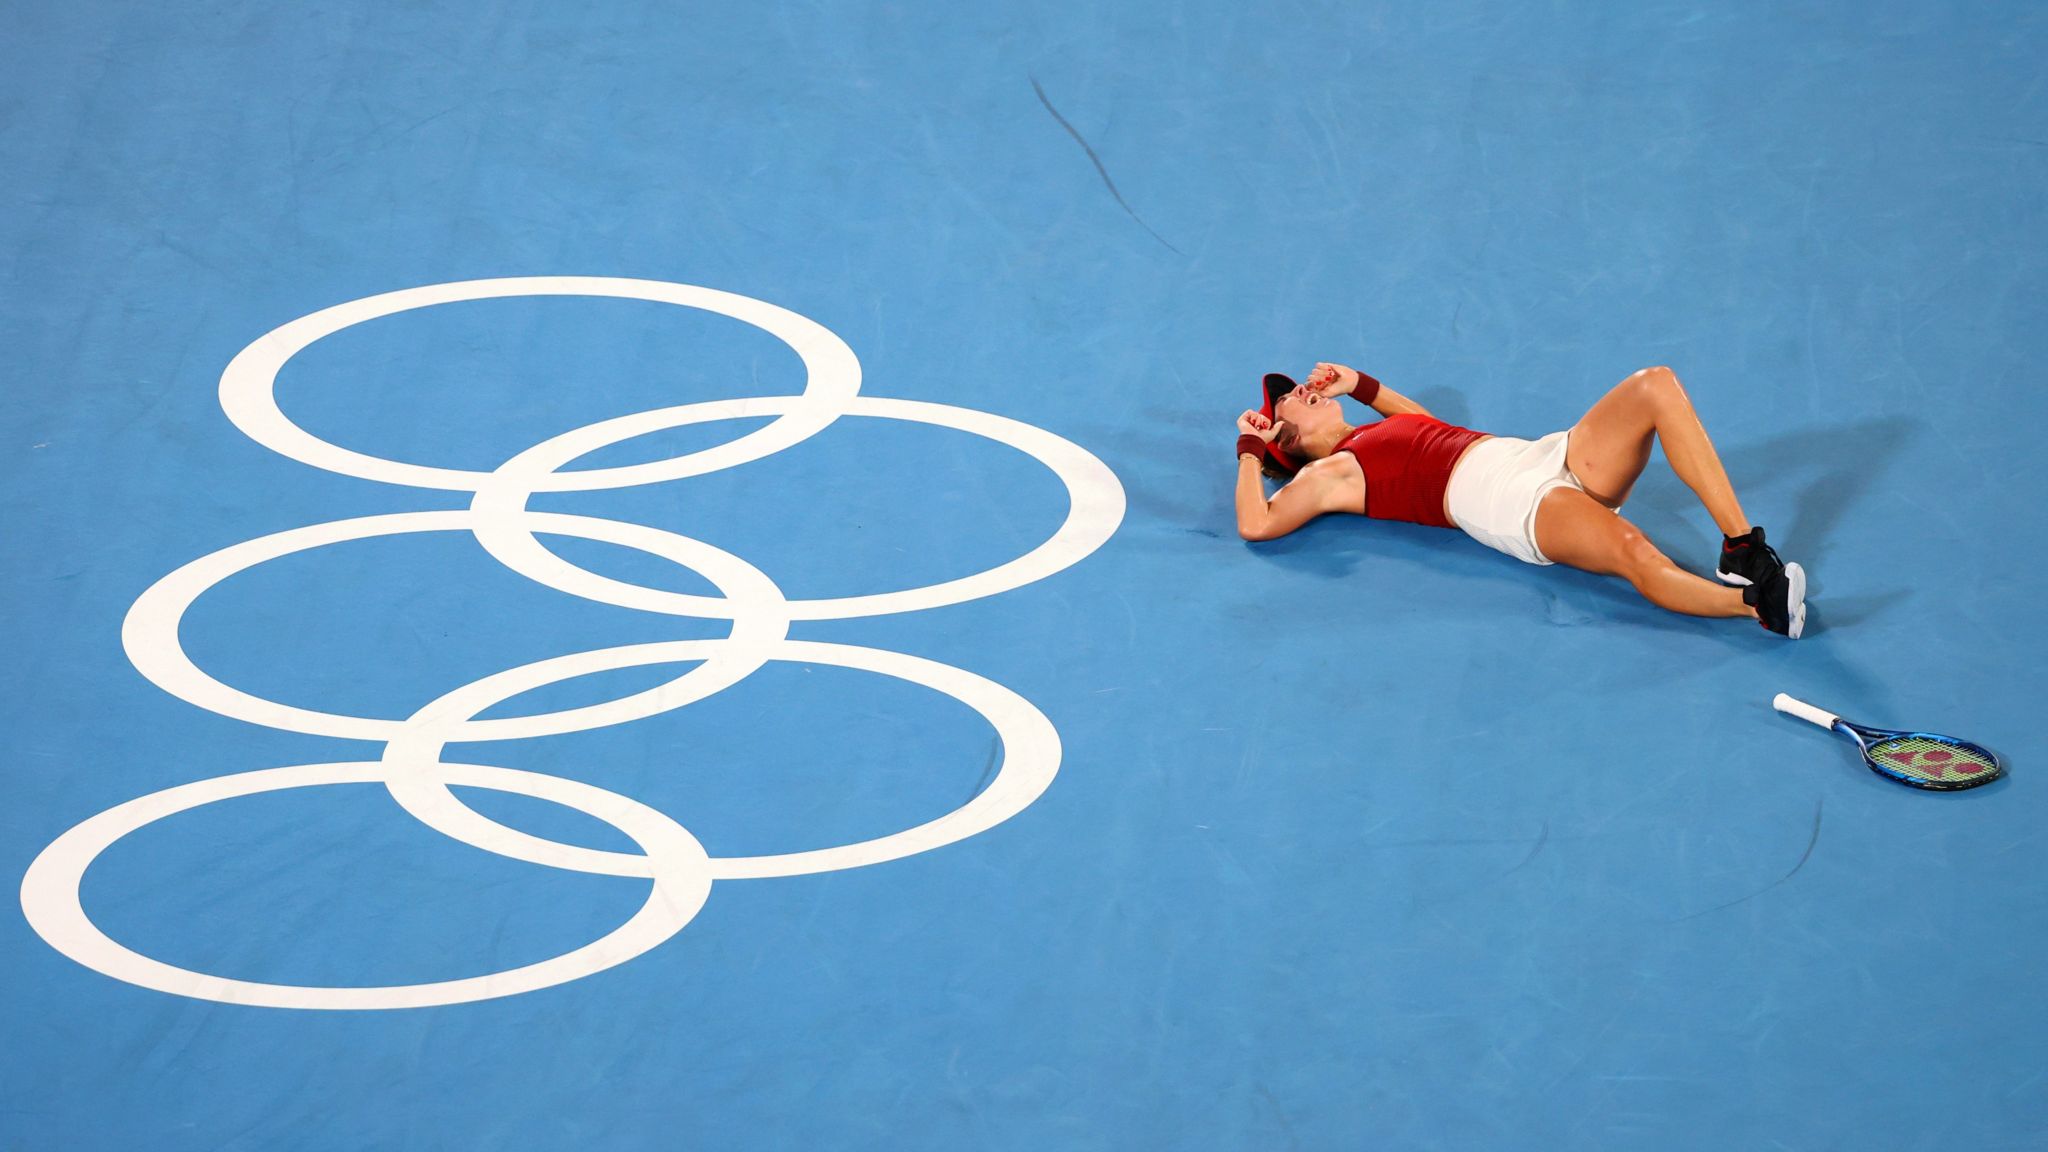 Olympic tennis player serves under a bright sky